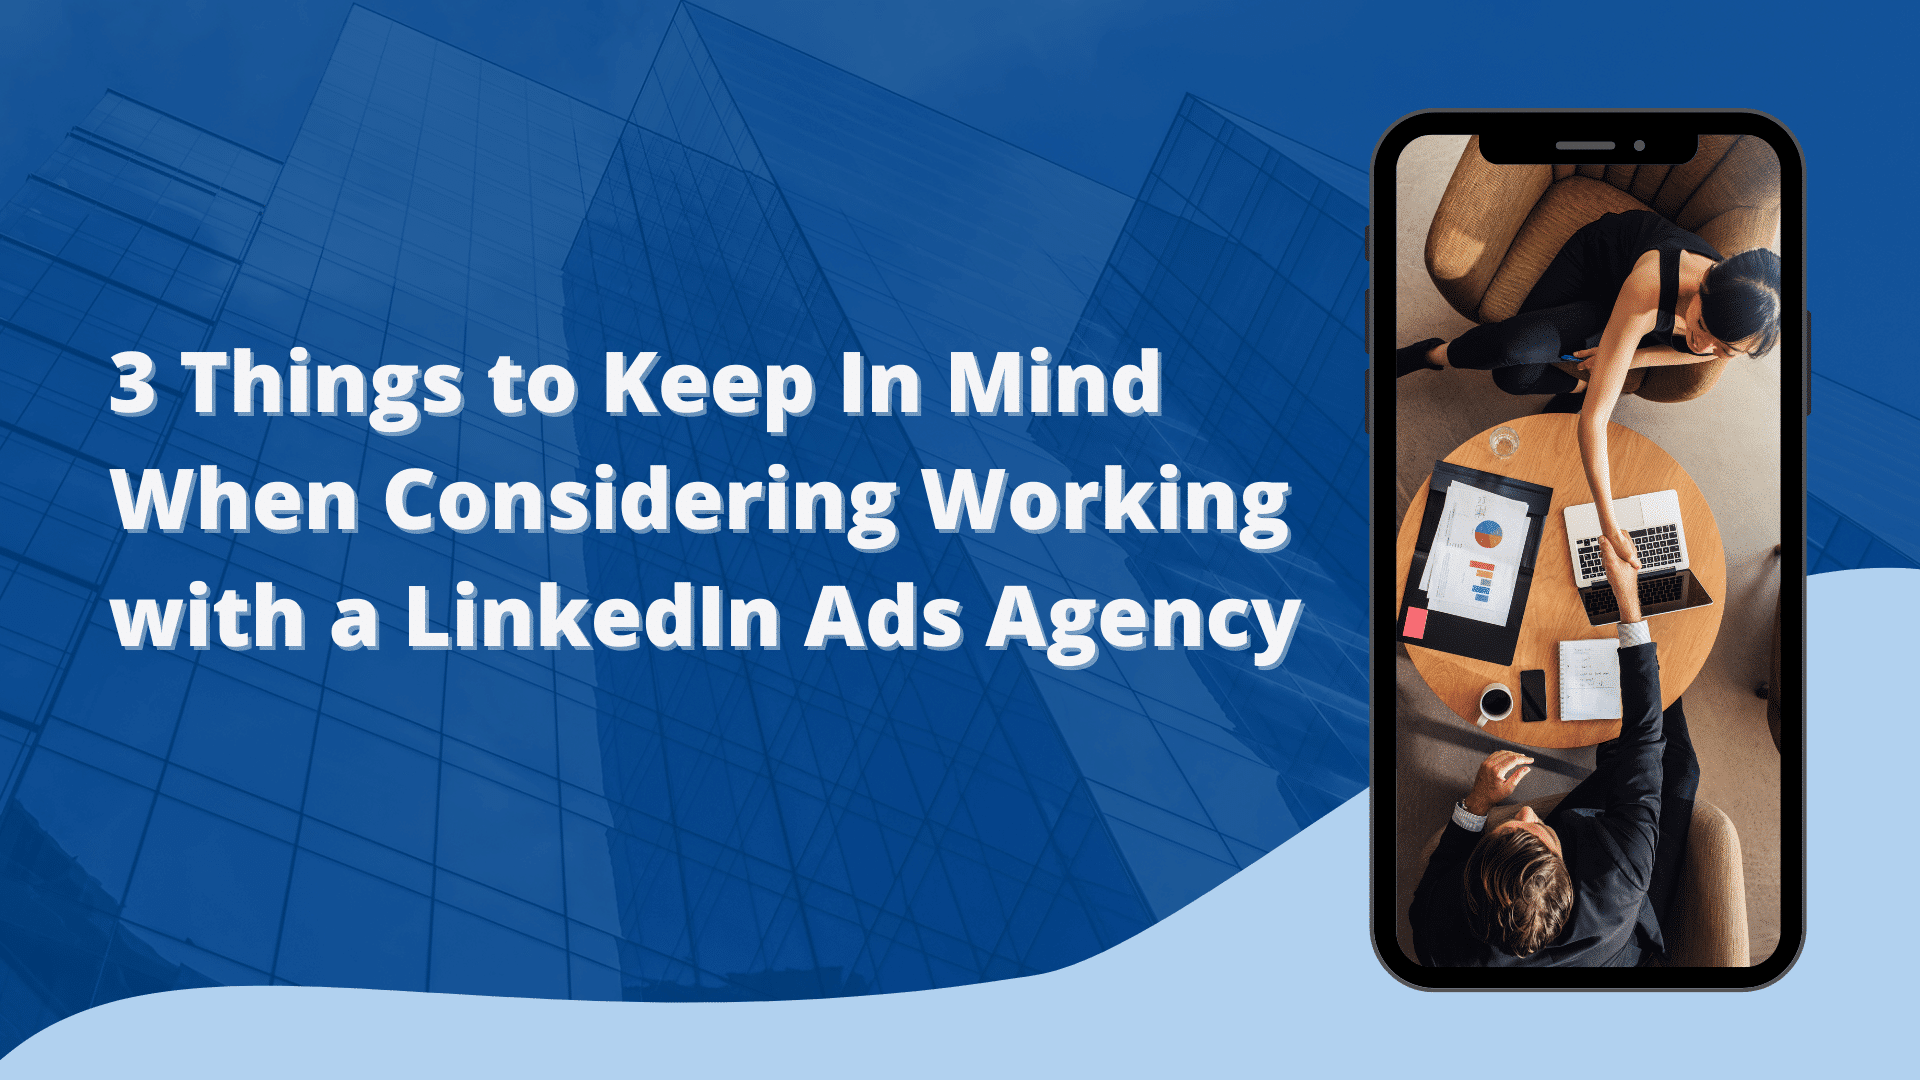 3 Things to Keep In Mind When Considering Working with a LinkedIn Ads Agency (1)